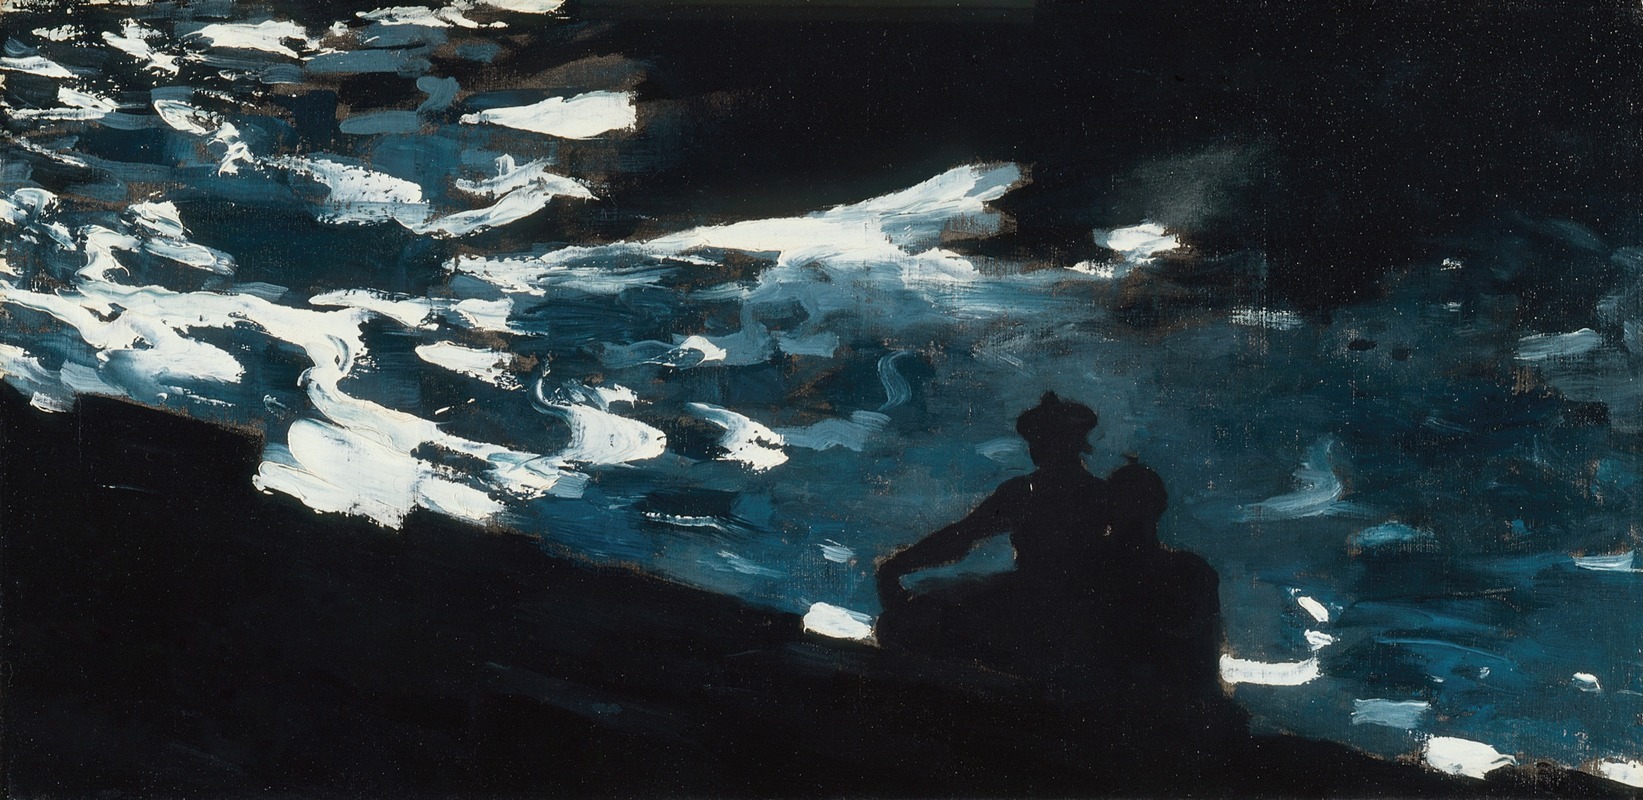 Winslow Homer - Moonlight on the Water